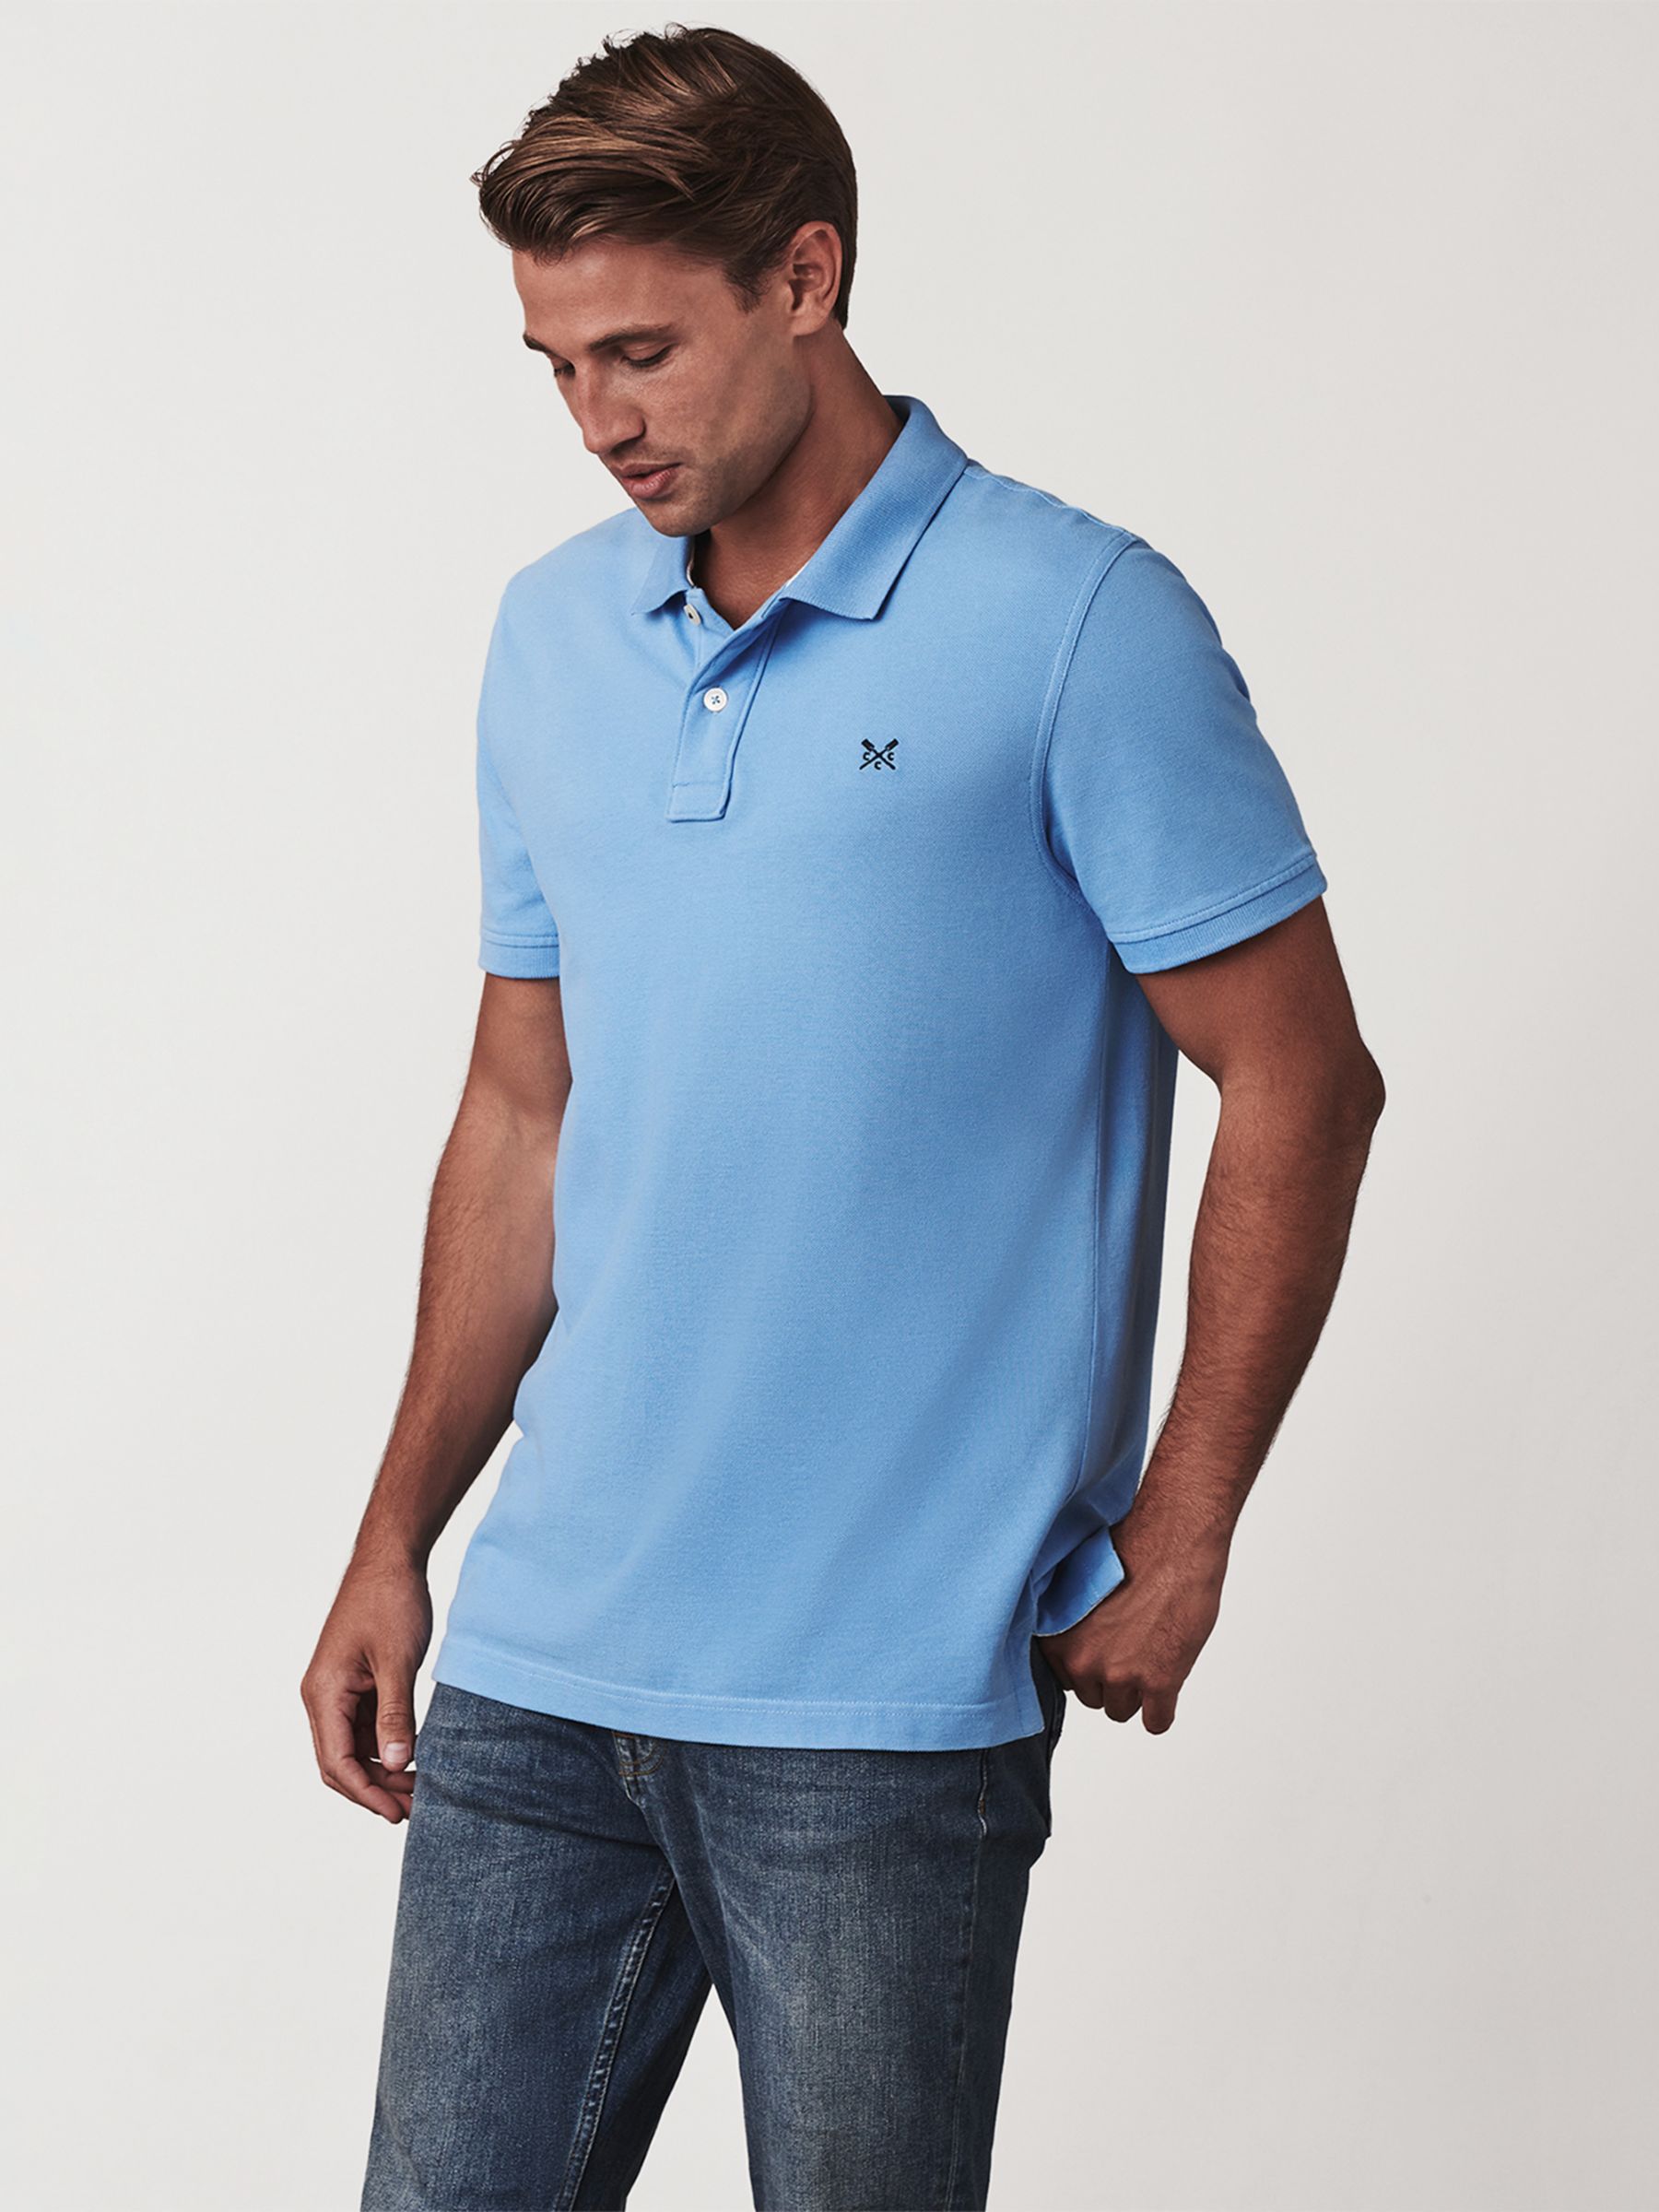 Crew Clothing Classic Pique Polo Shirt Bright Blue At John Lewis And Partners